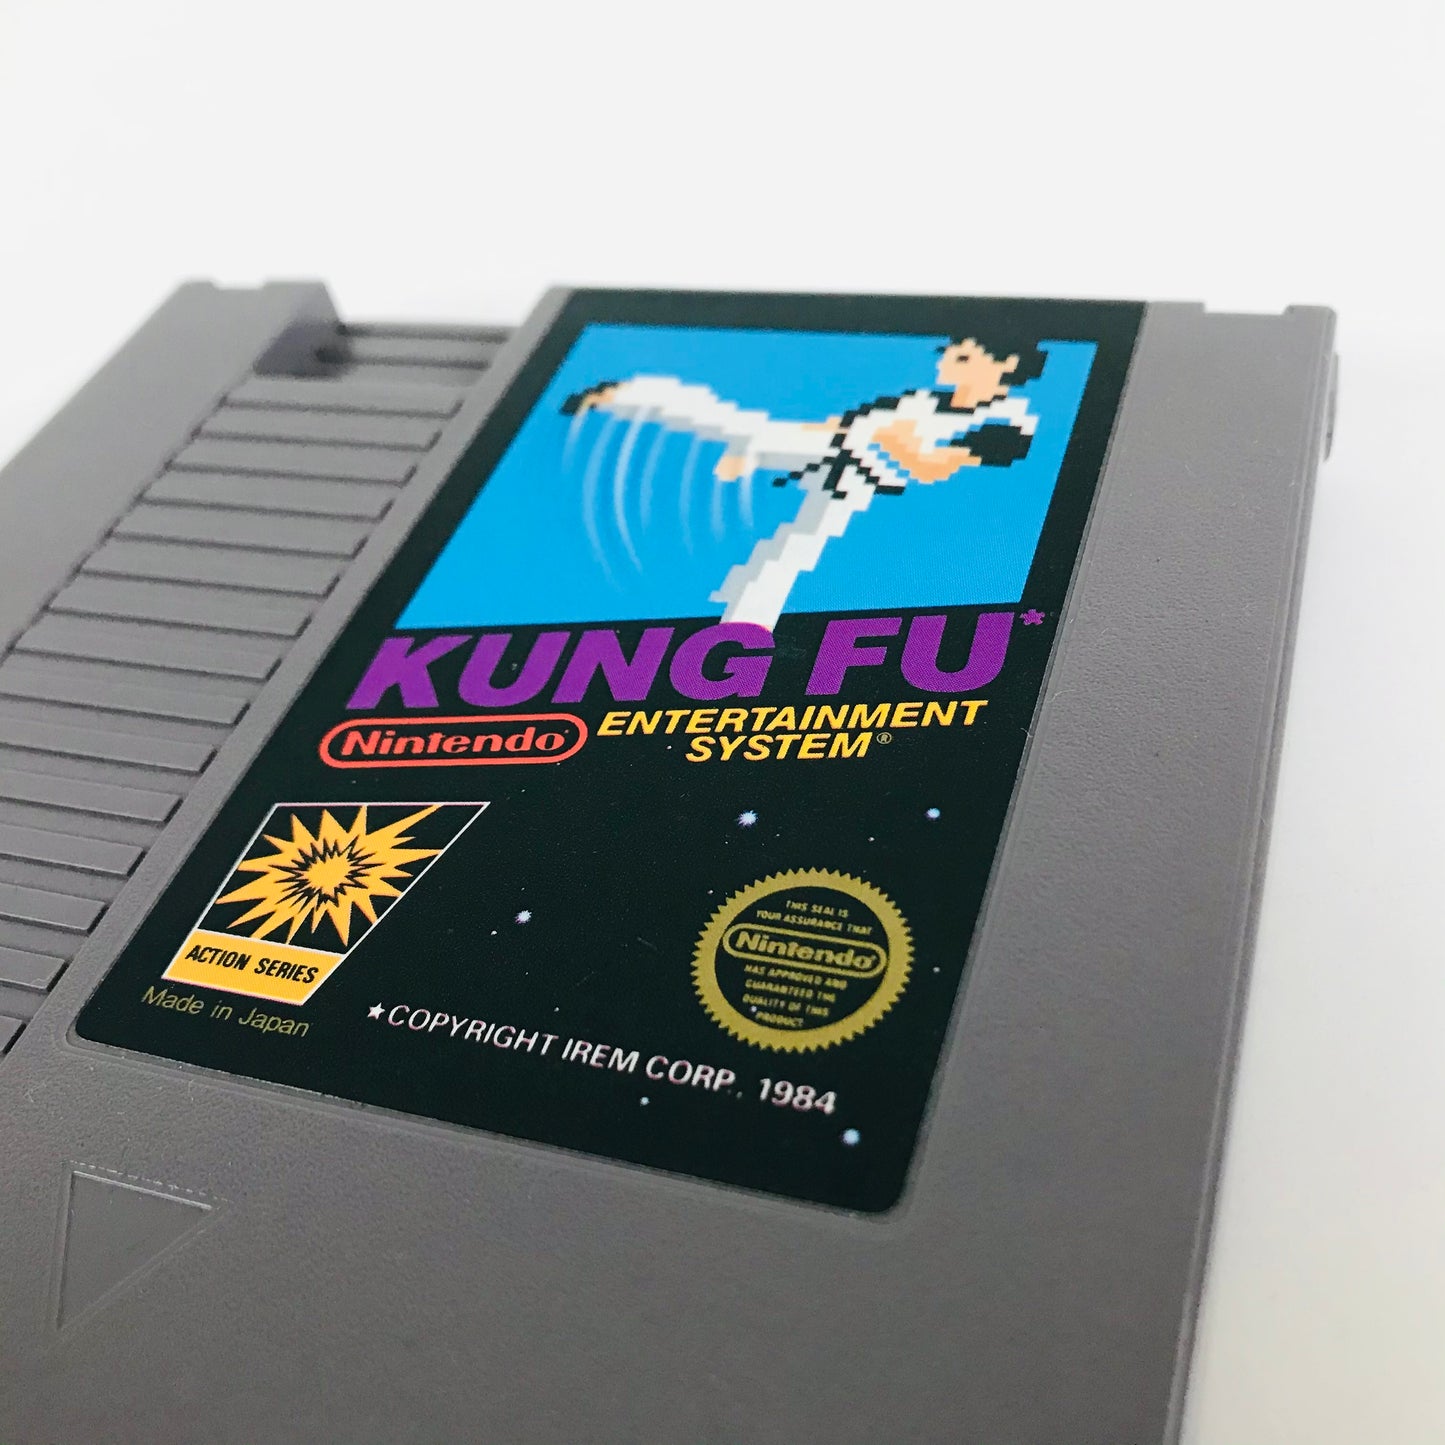 1985 Nintendo NES Kung Fu Karate Classic 1980s Video Game Cartridge Tested Works Great